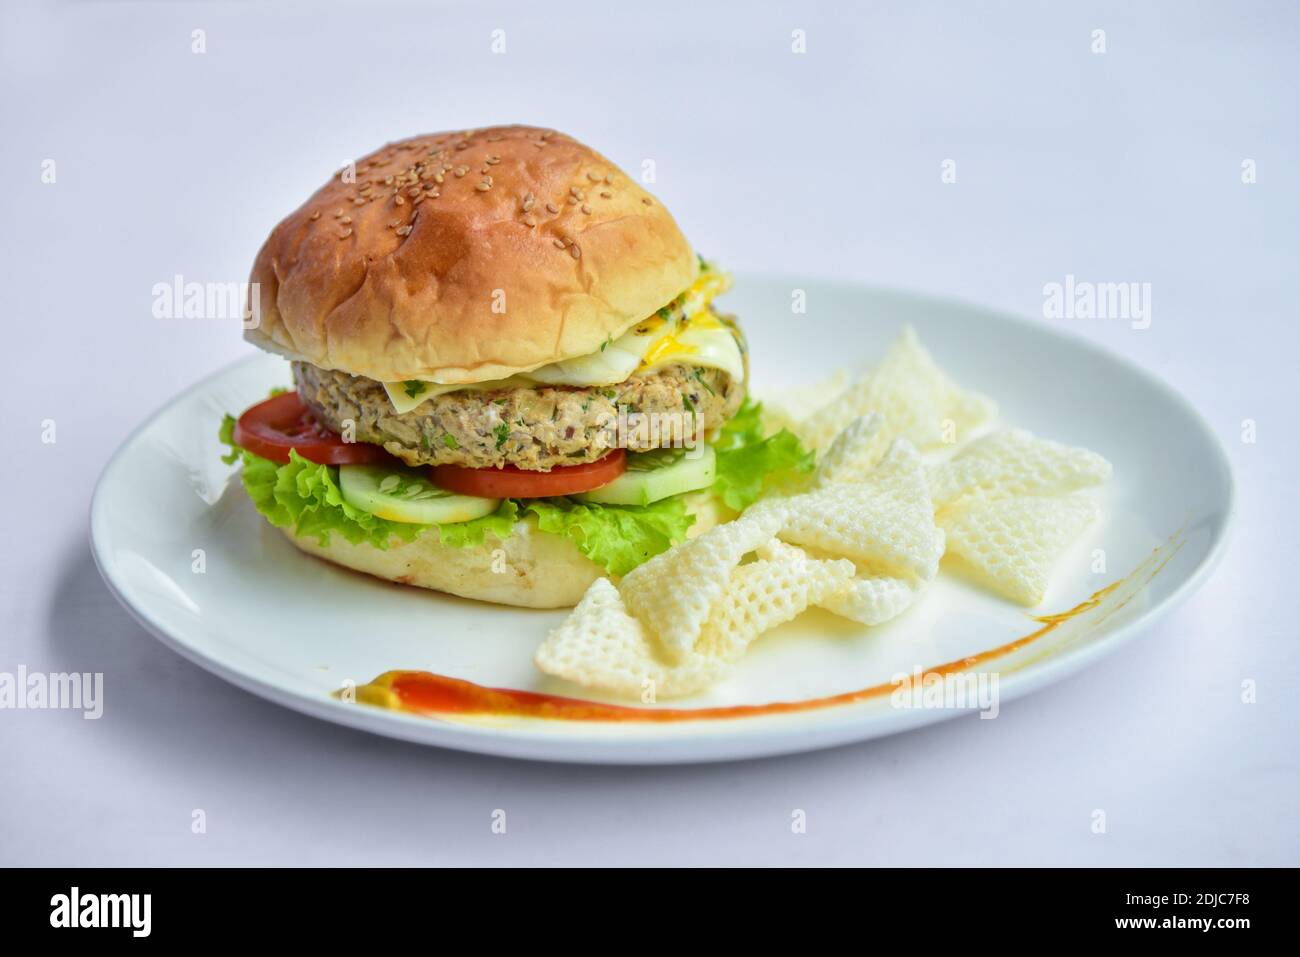 burger on a plate with chips. burger with patty and vegetables like cucumber, tomatoes, lettuce and half boiled egg and chips. Stock Photo